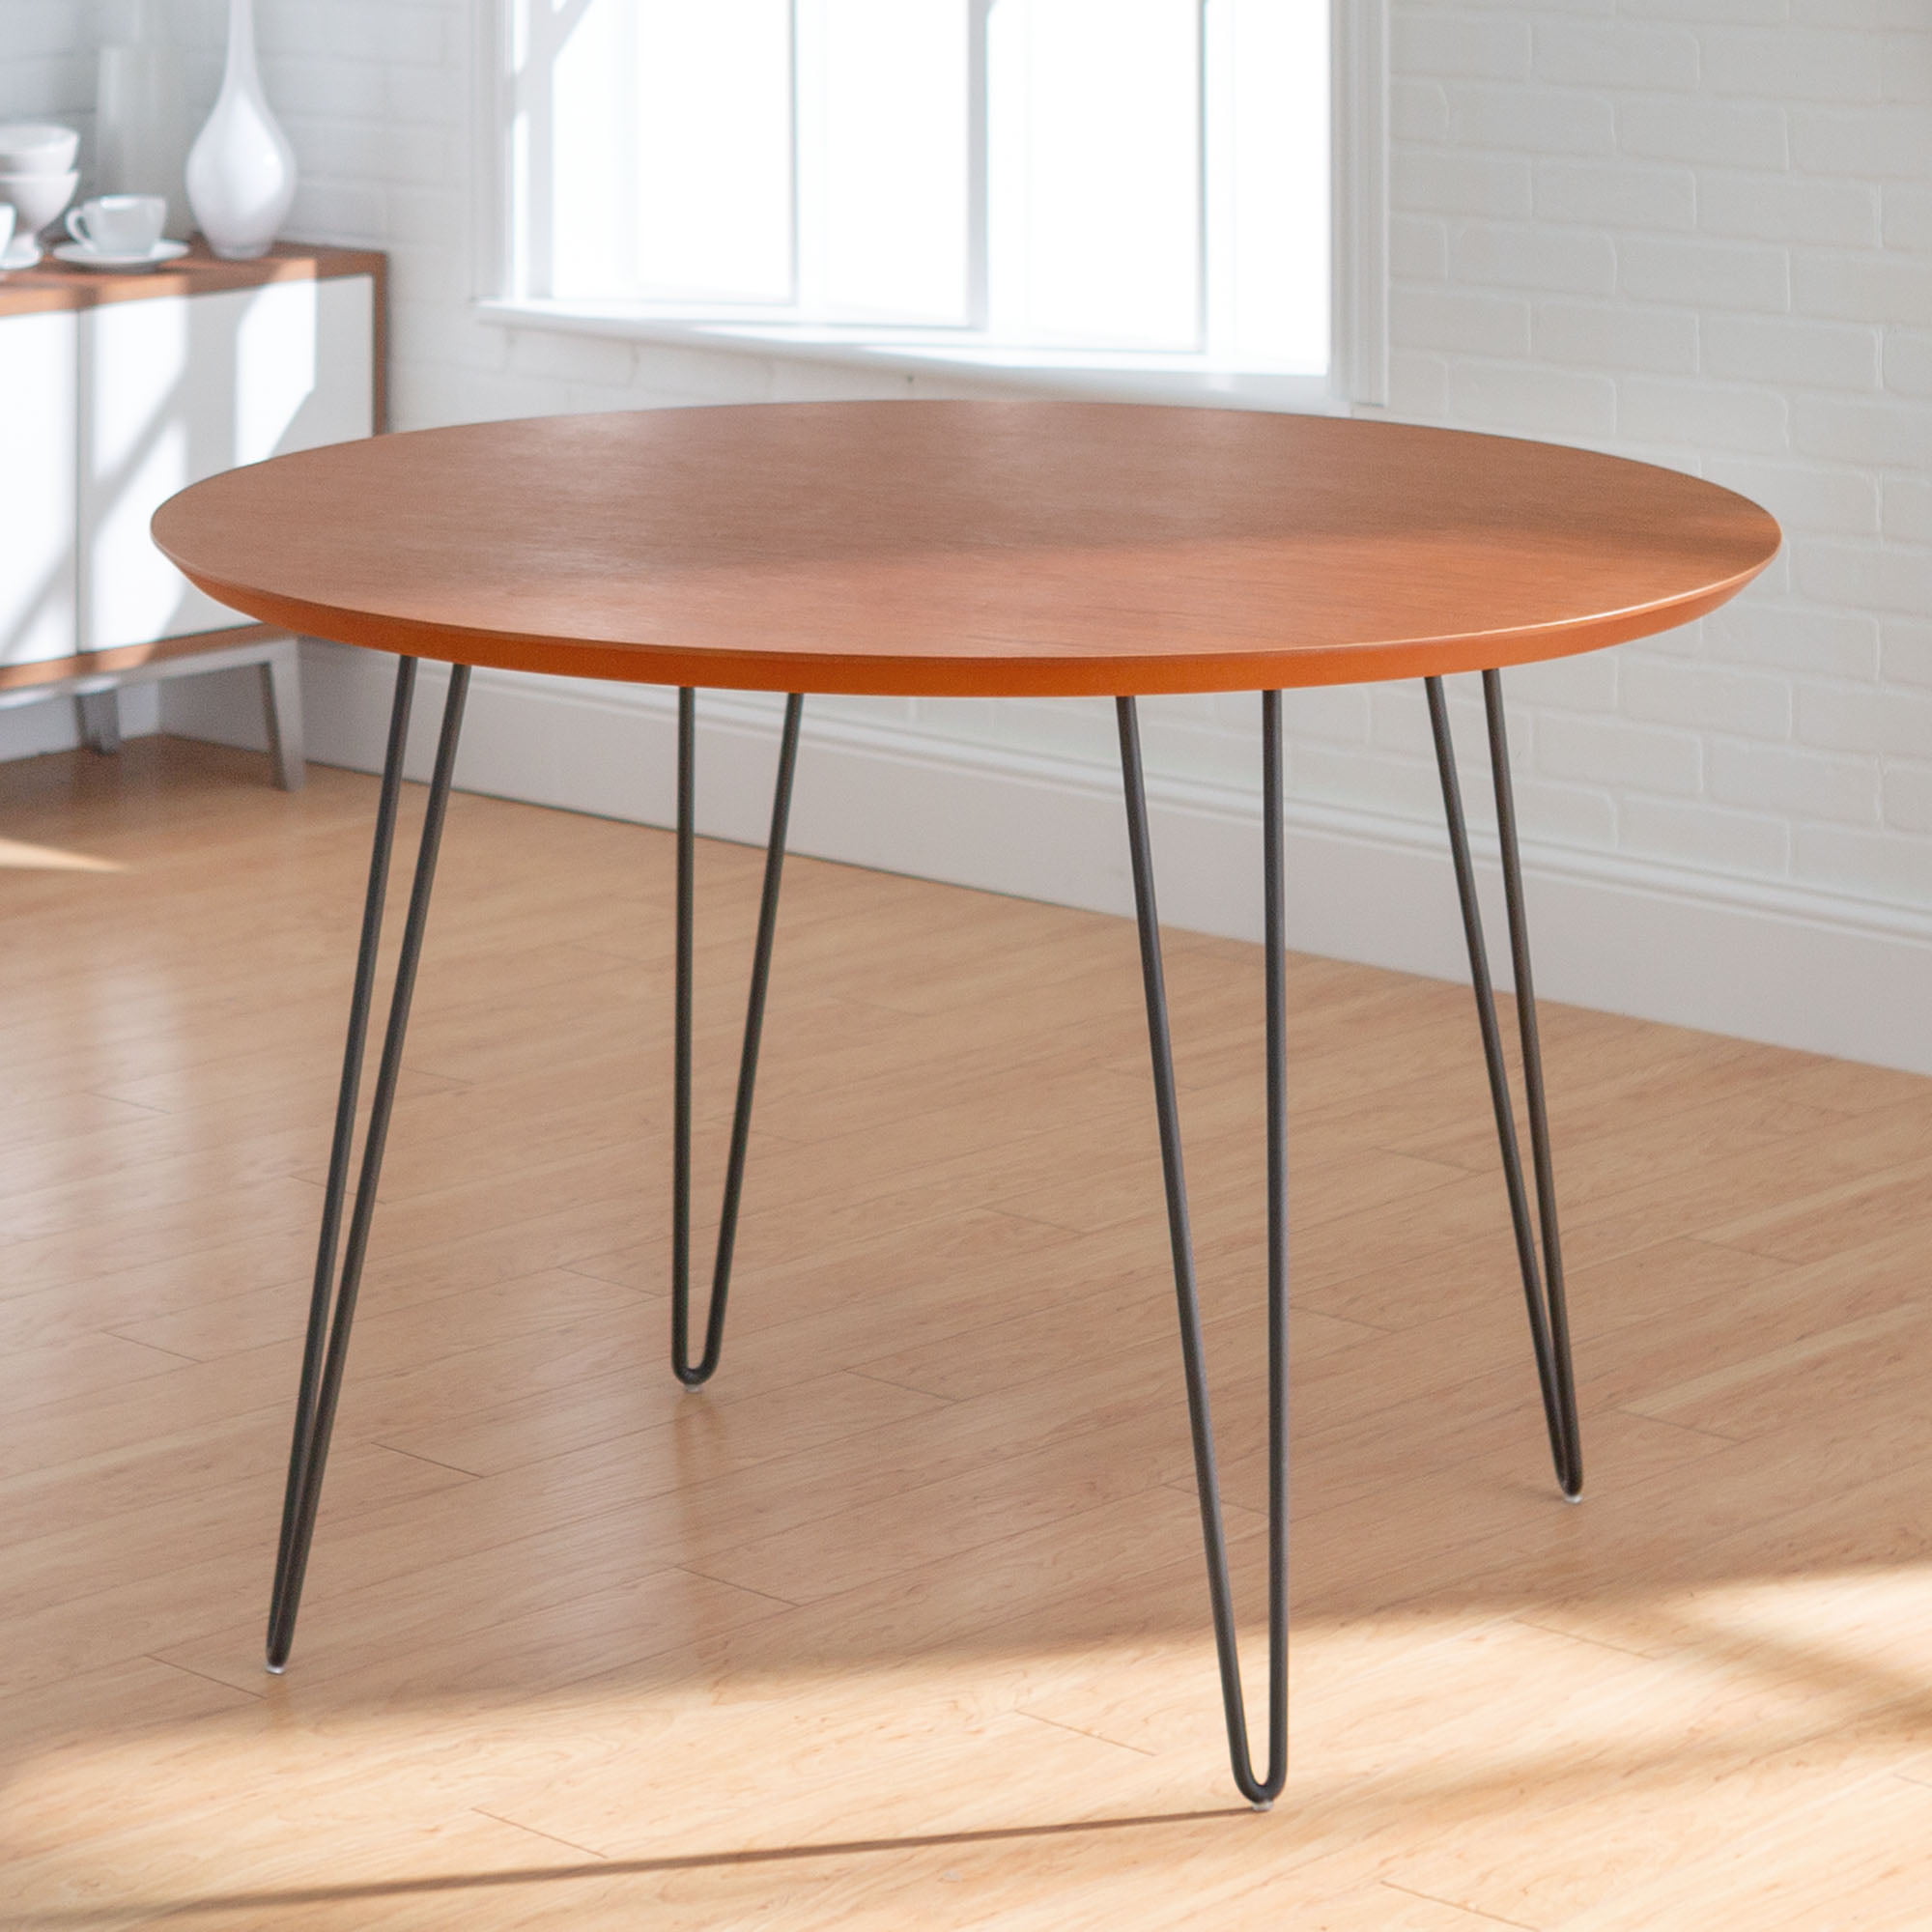 35.5 Target Marketing Systems Tania Mid Century Modern 4-Seater Round Dining Table Walnut